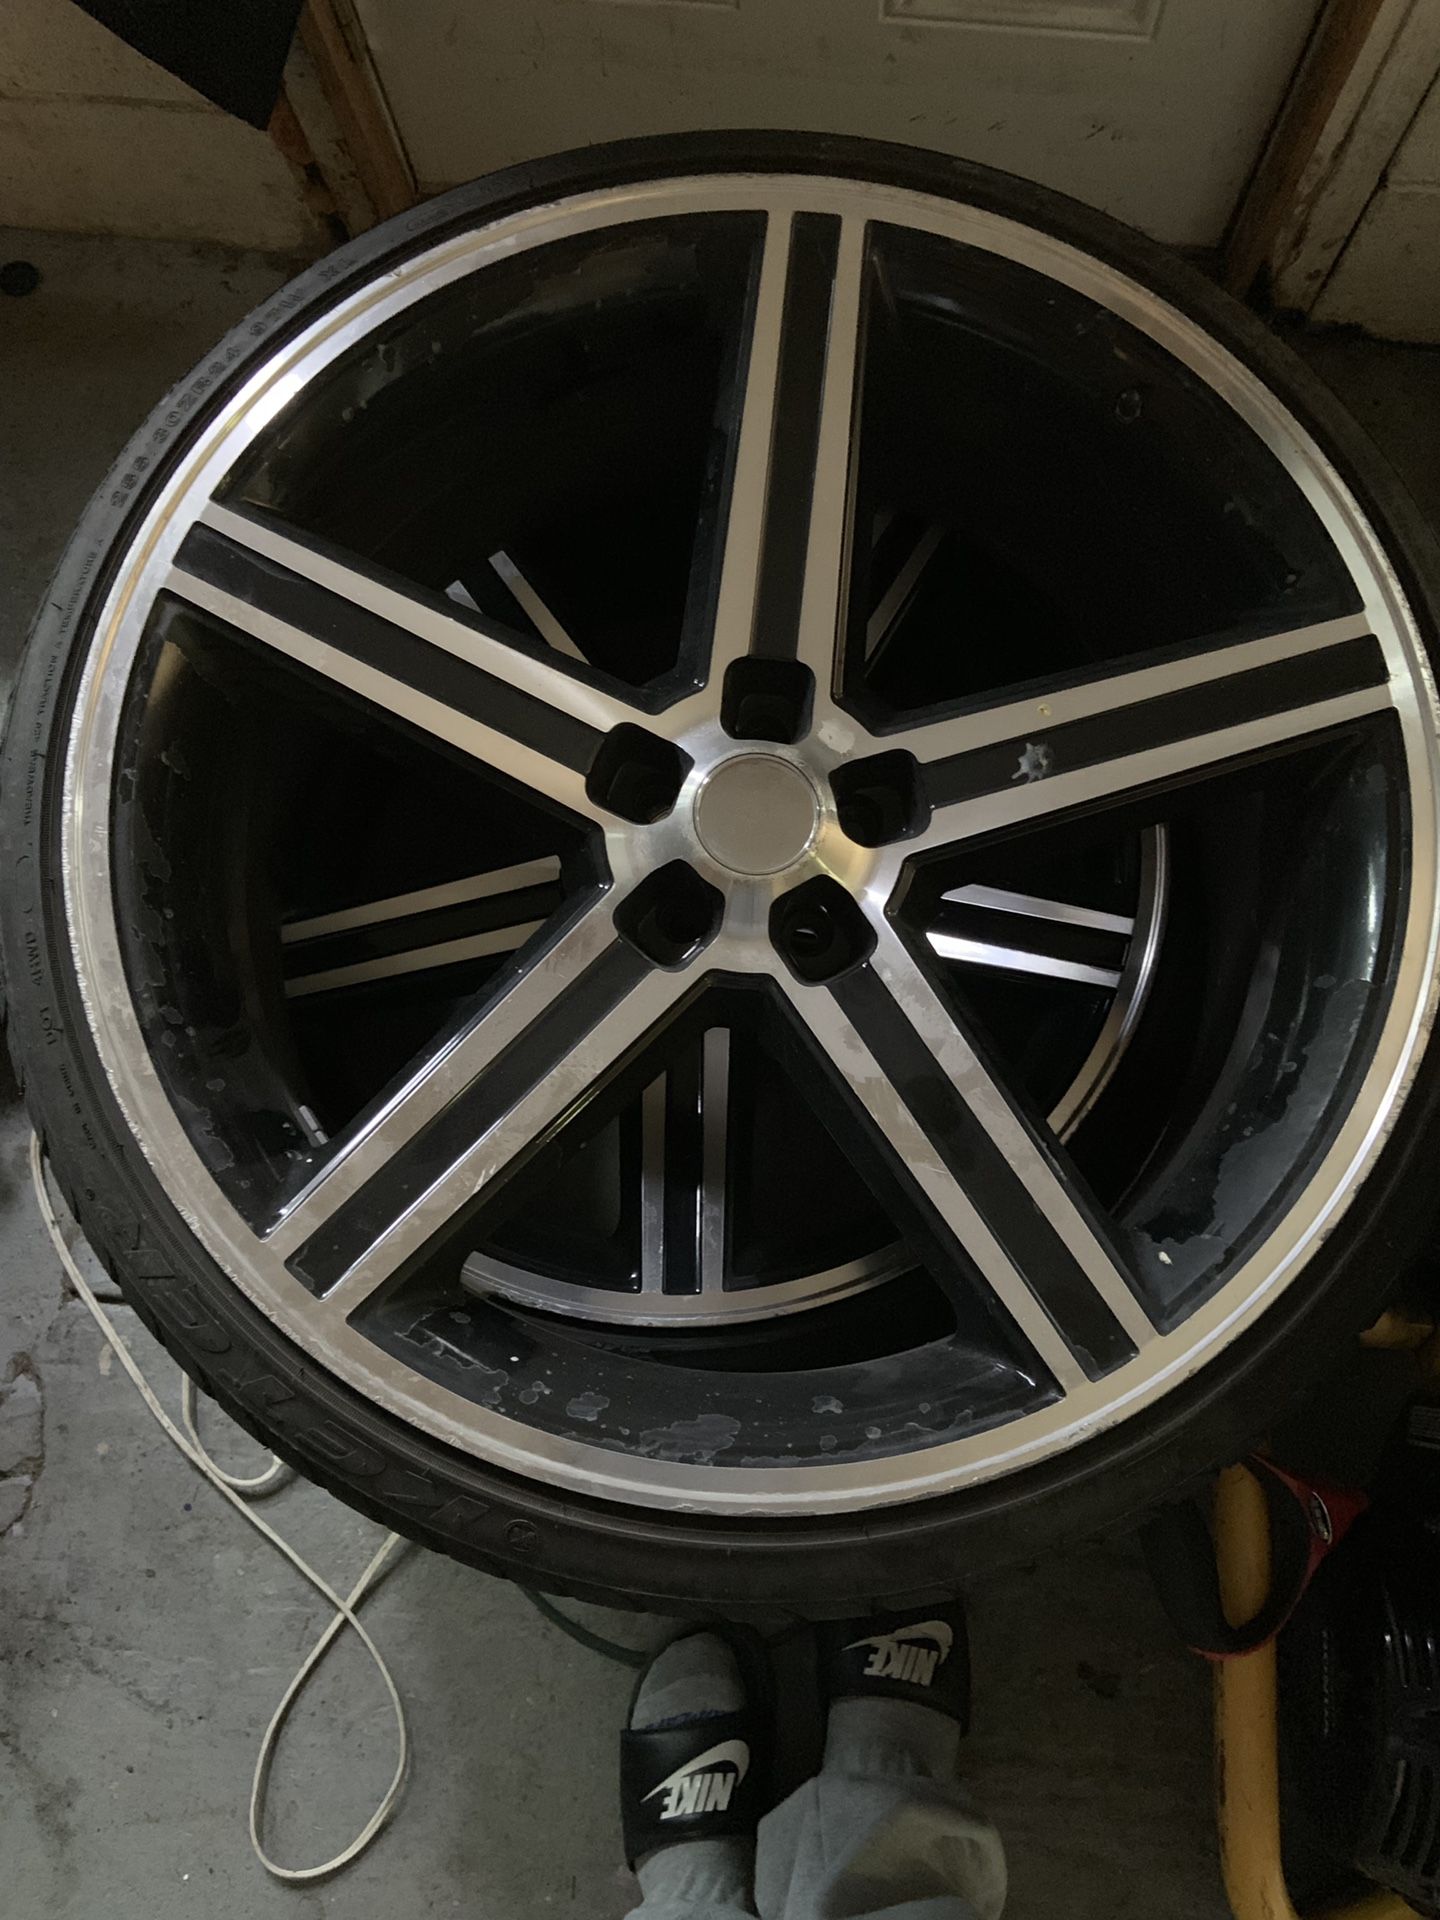 Rims for sale size is 255/30ZR24